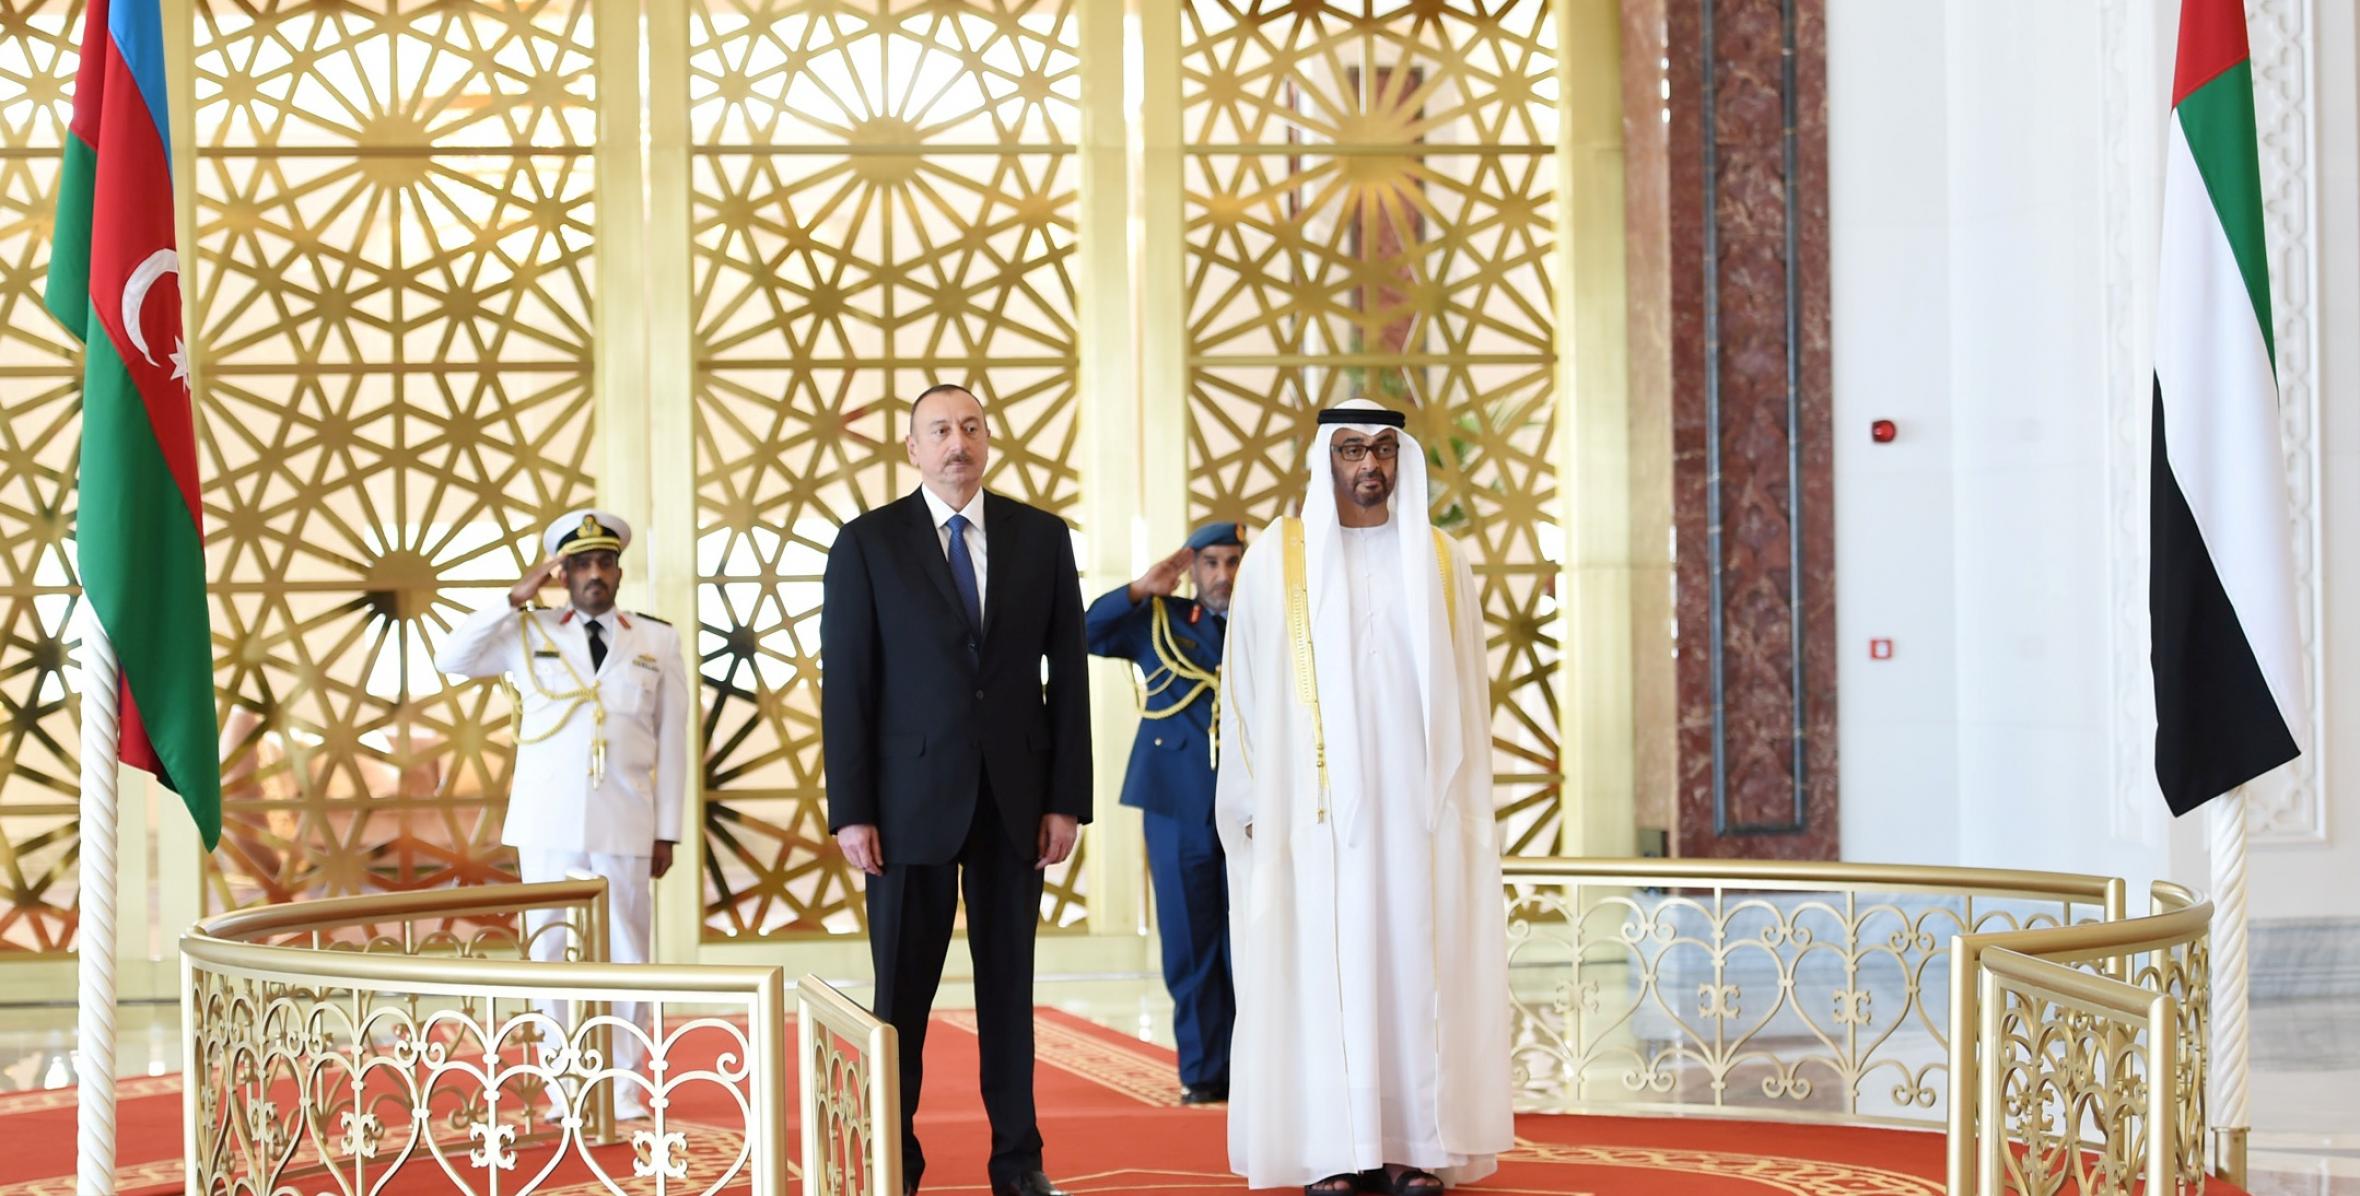 Official welcoming ceremony for President Ilham Aliyev was held in Abu Dhabi